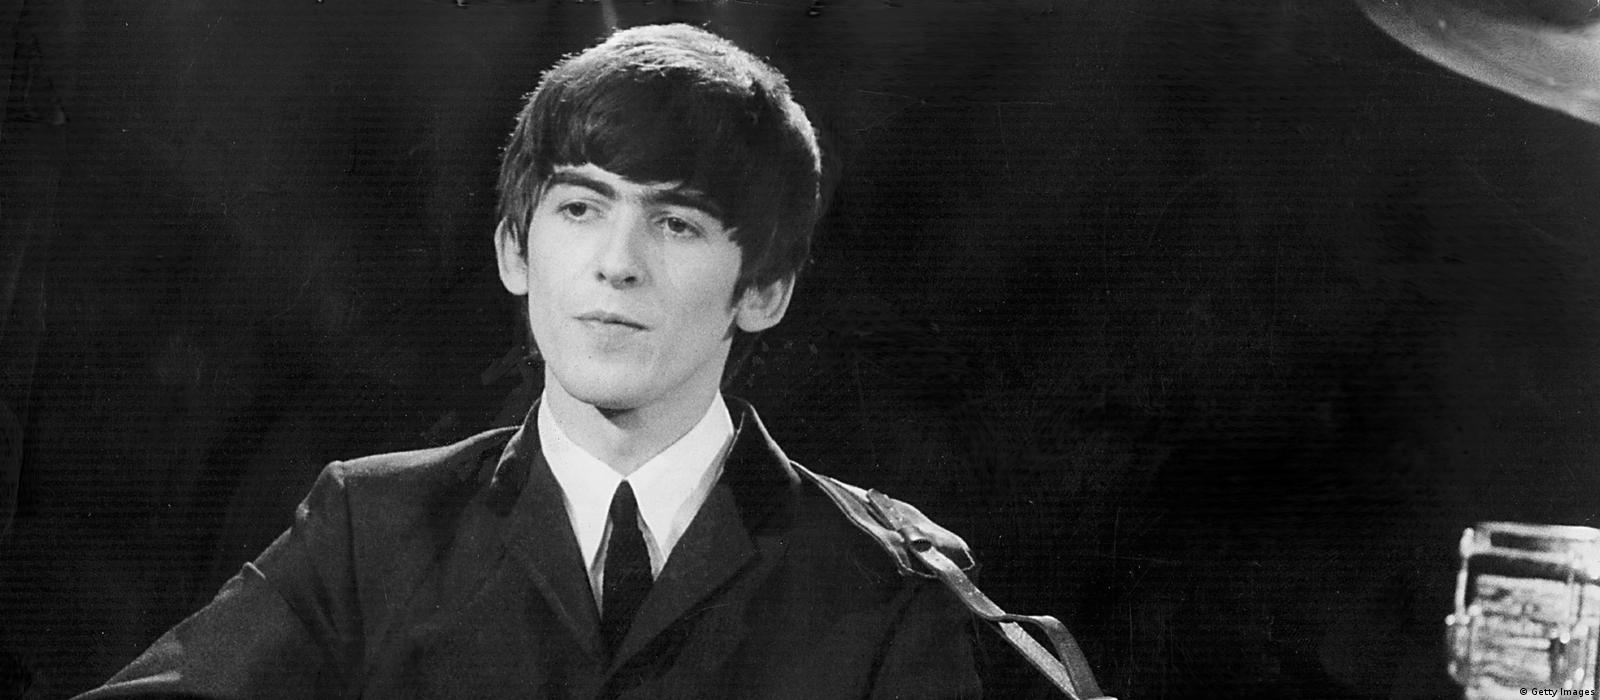 Remembering George Harrison 10 years after his death